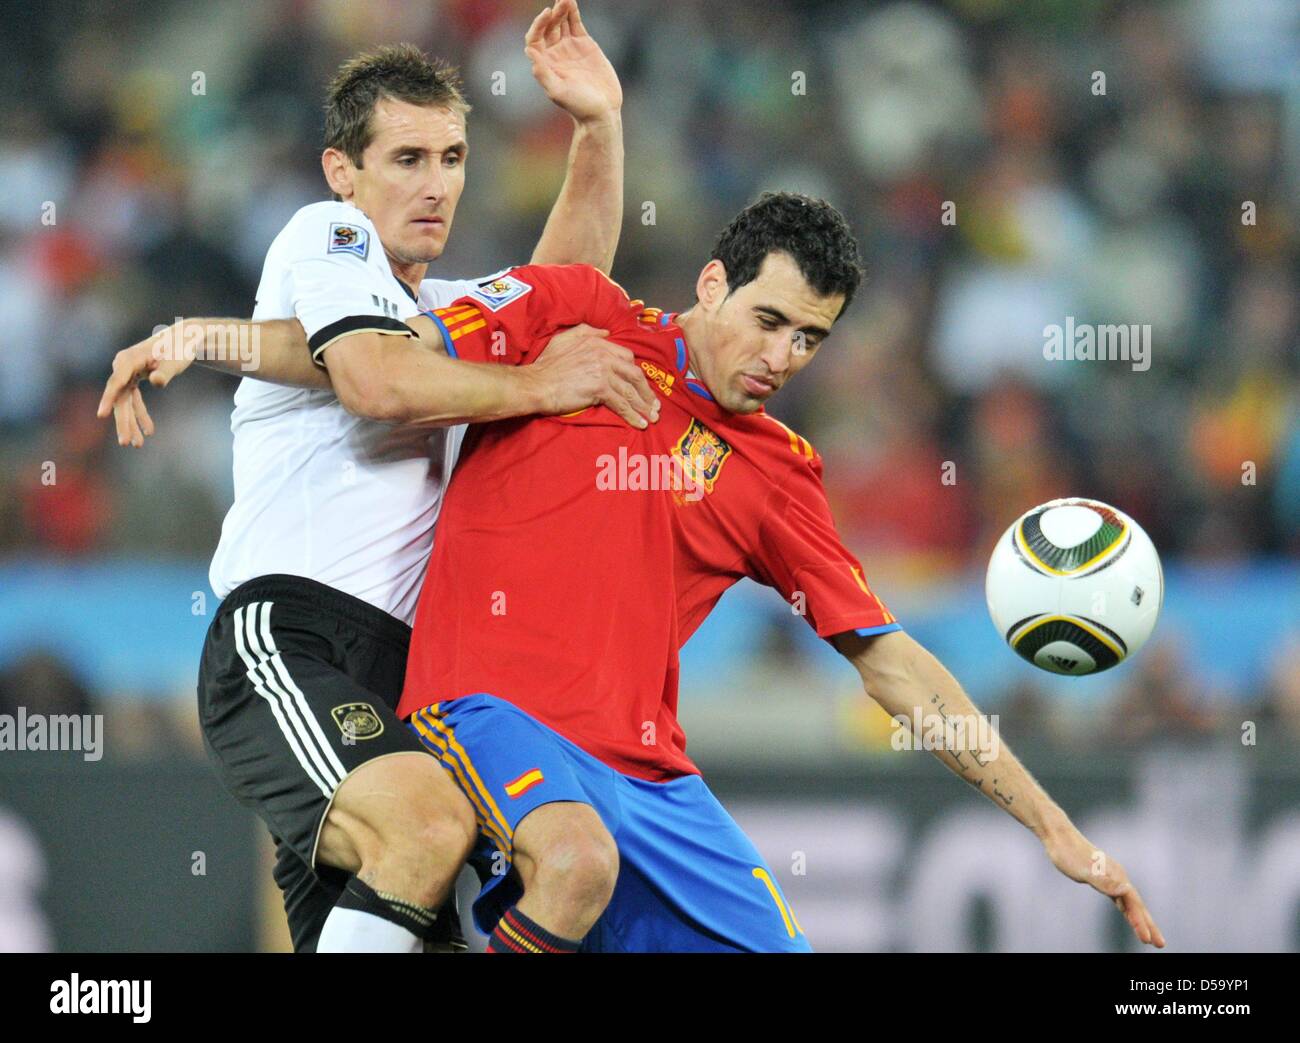 Miroslav Klose (L) of Germany vies with Sergio Busquets of Spain during the 2010 FIFA World Cup semi-final match between Germany and Spain at the Durban Stadium in Durban, South Africa 07 July 2010. Photo: Bernd Weissbrod dpa - Please refer to http://dpaq.de/FIFA-WM2010-TC Stock Photo